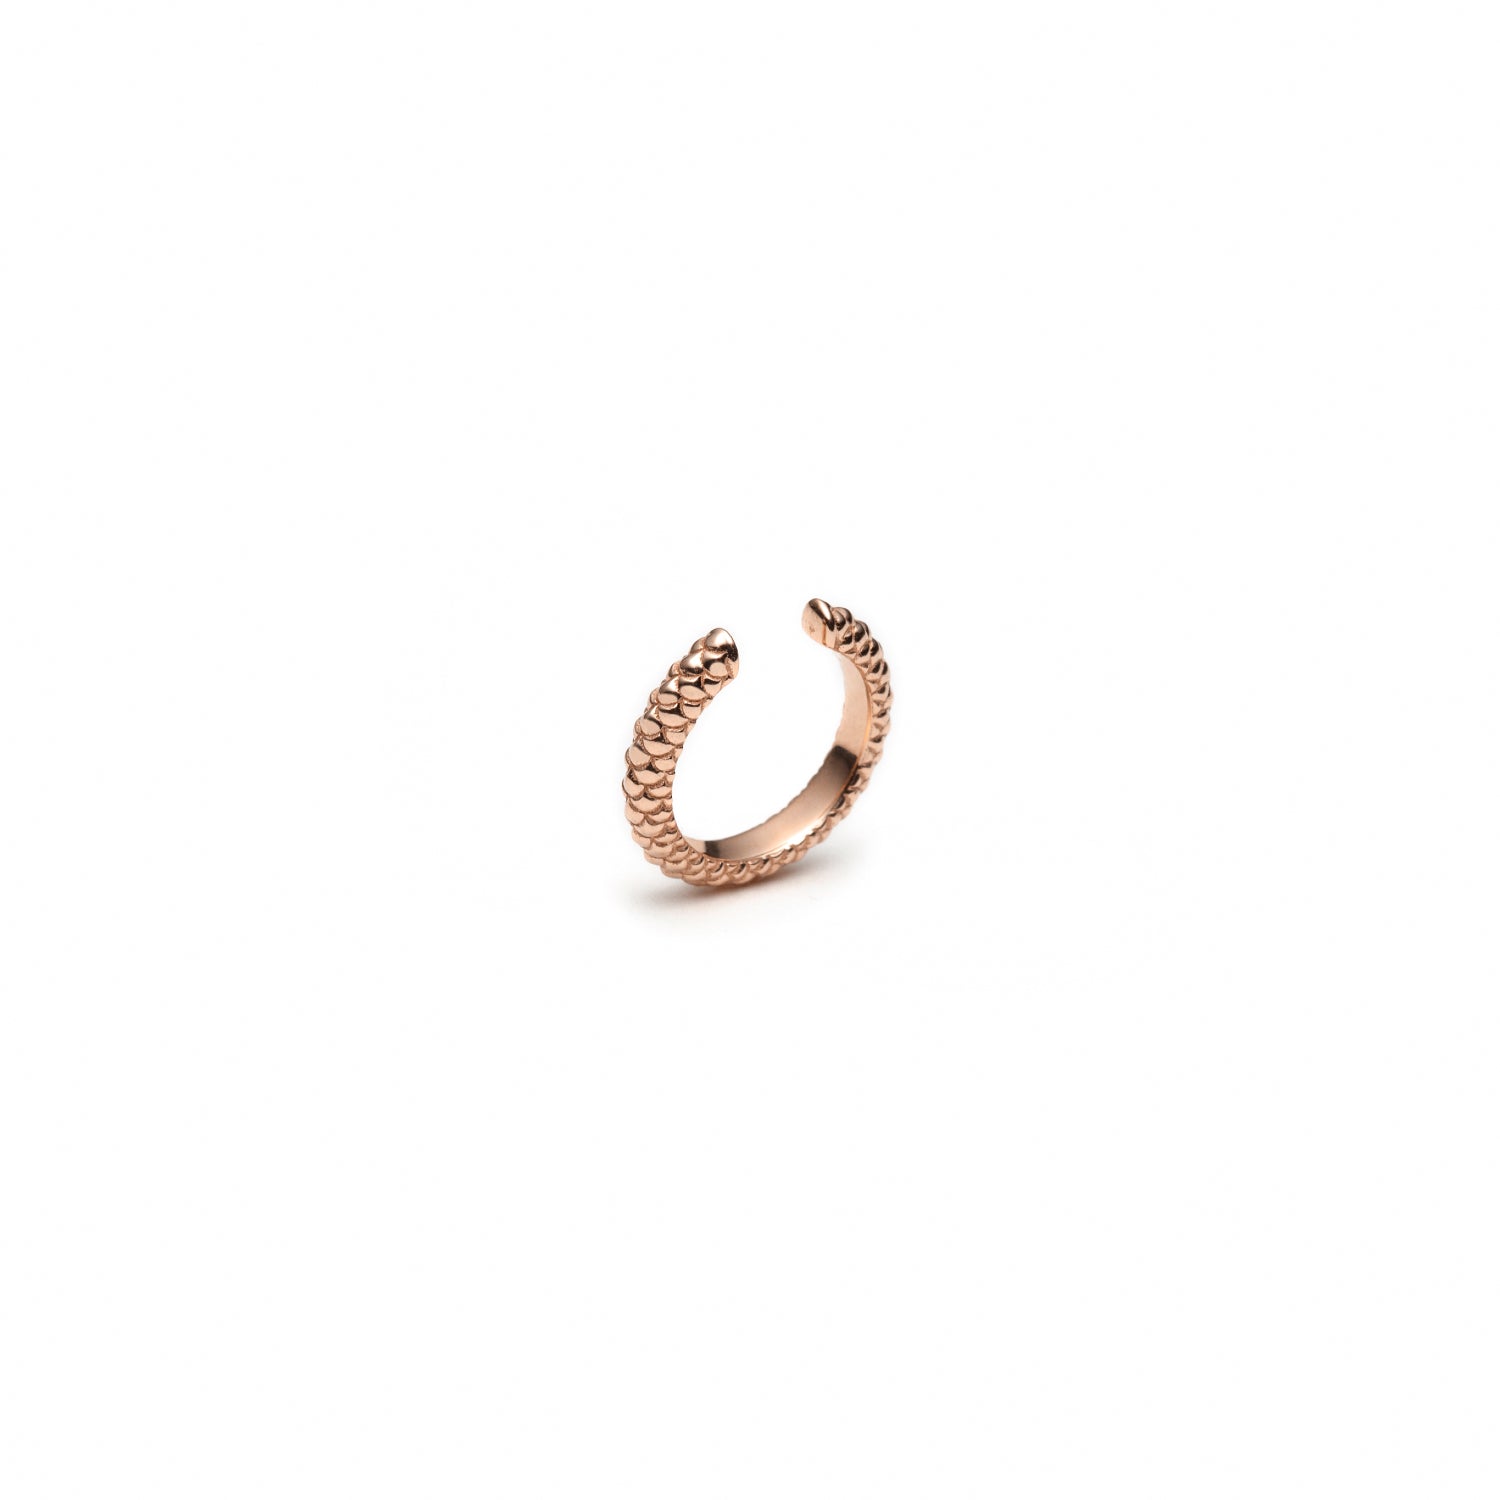 Lepia Mermaid Scales Motif Ear Cuff in Rose Gold Side View